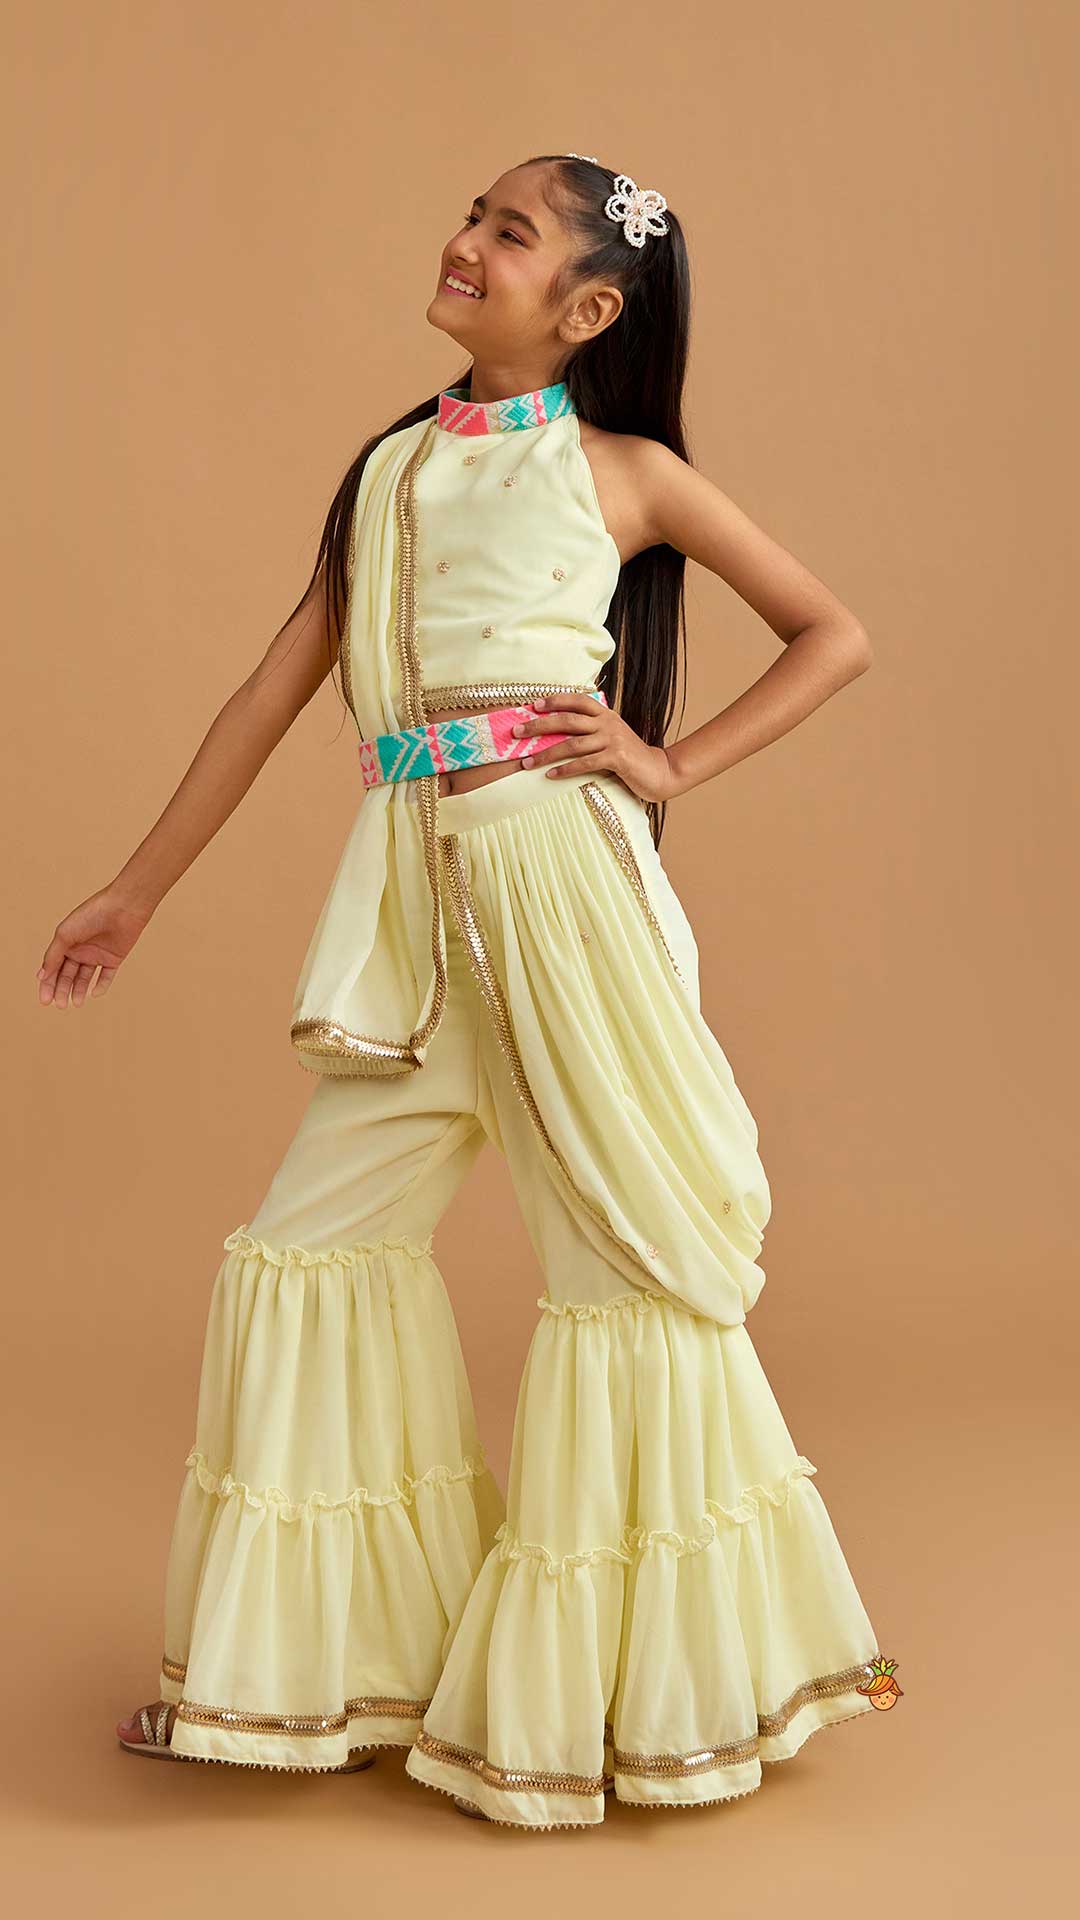 Halter Neck Yellow Top And Sharara With Attached Dupatta And Waist Belt